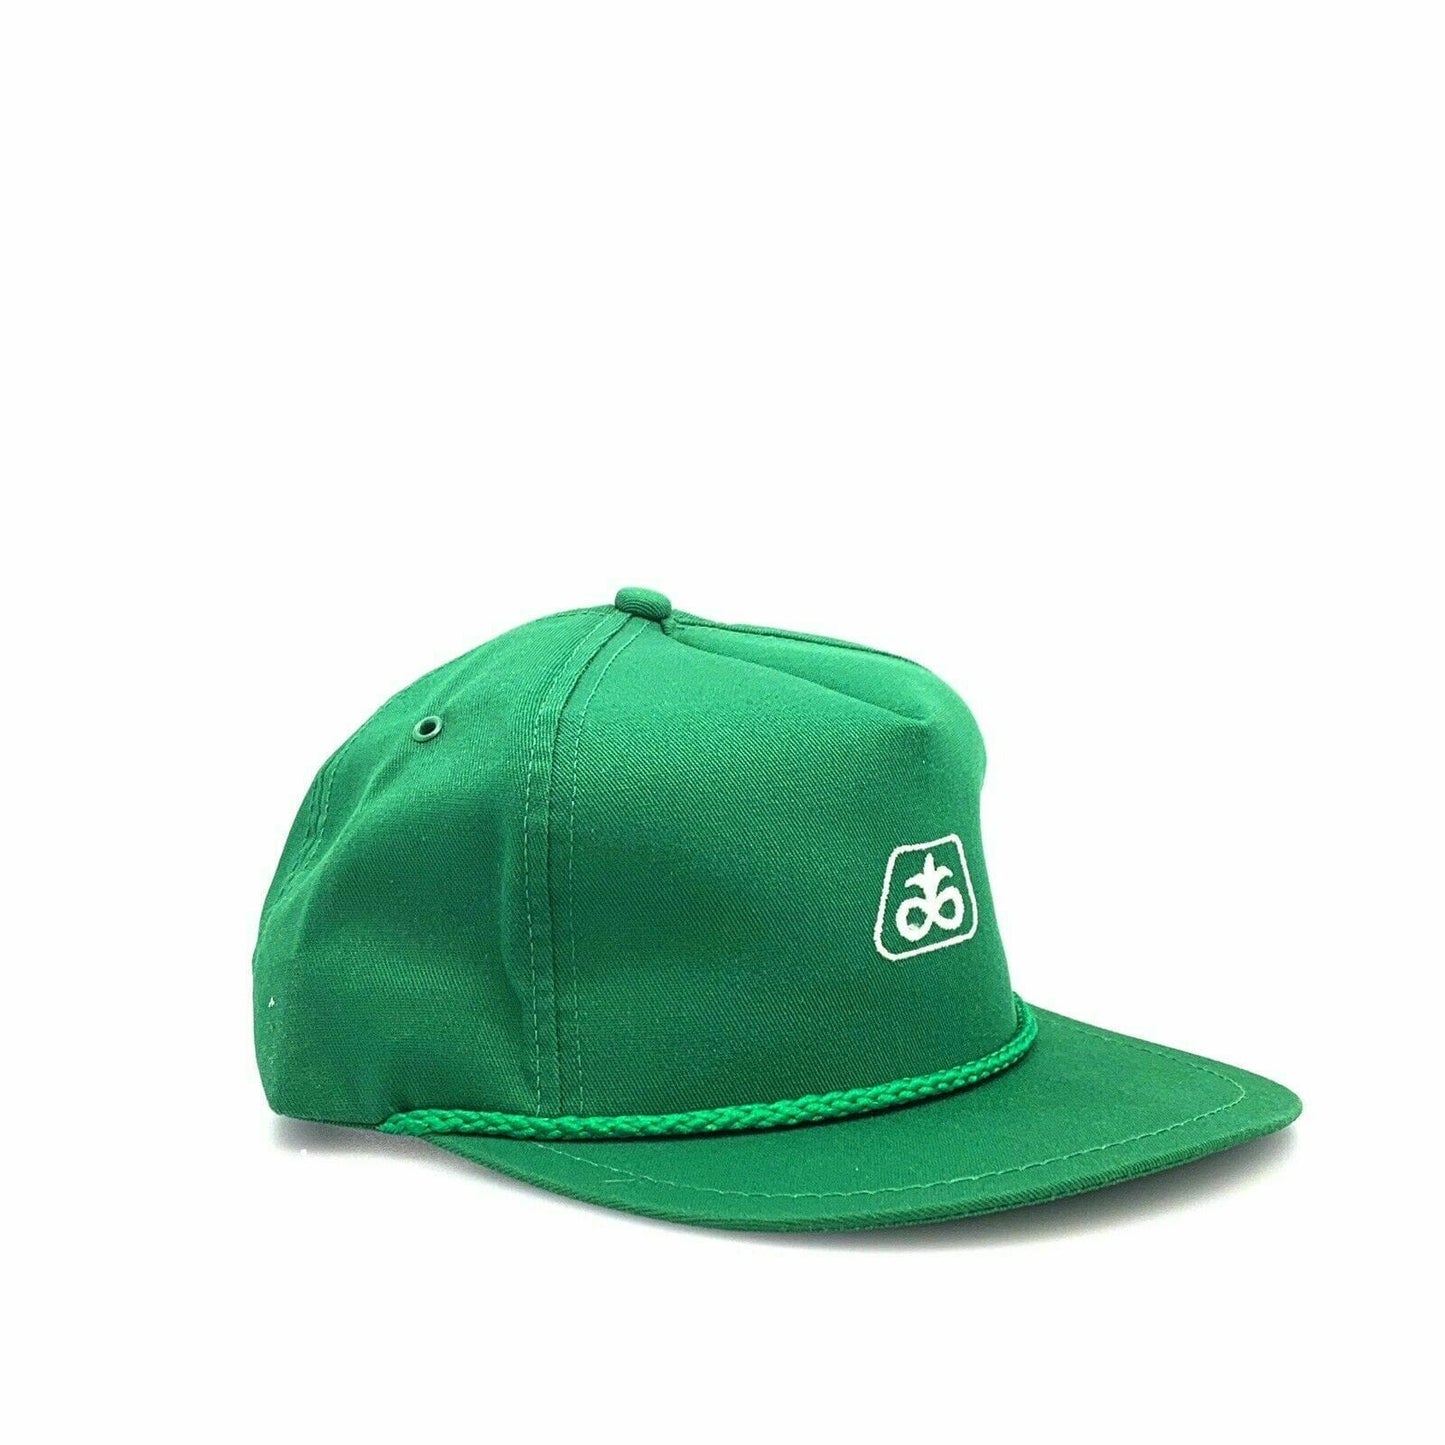 Vintage PIONEER SEED Hat Green K Products 5 Panel Rope Clasp Cap OSFM - parsimonyshoppes